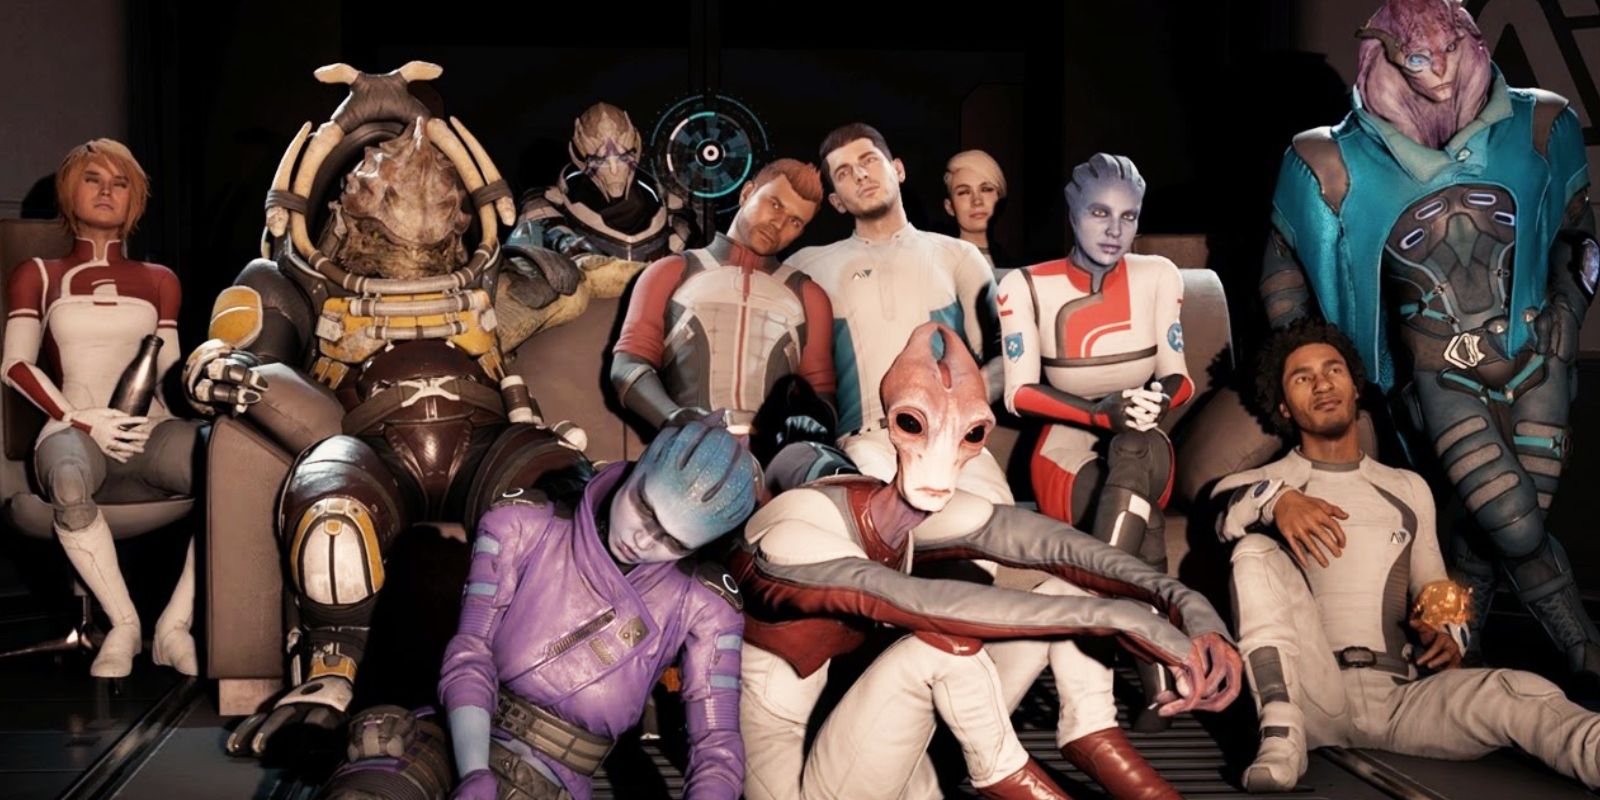 An image of all the Mass Effect characters smiling in a group photo